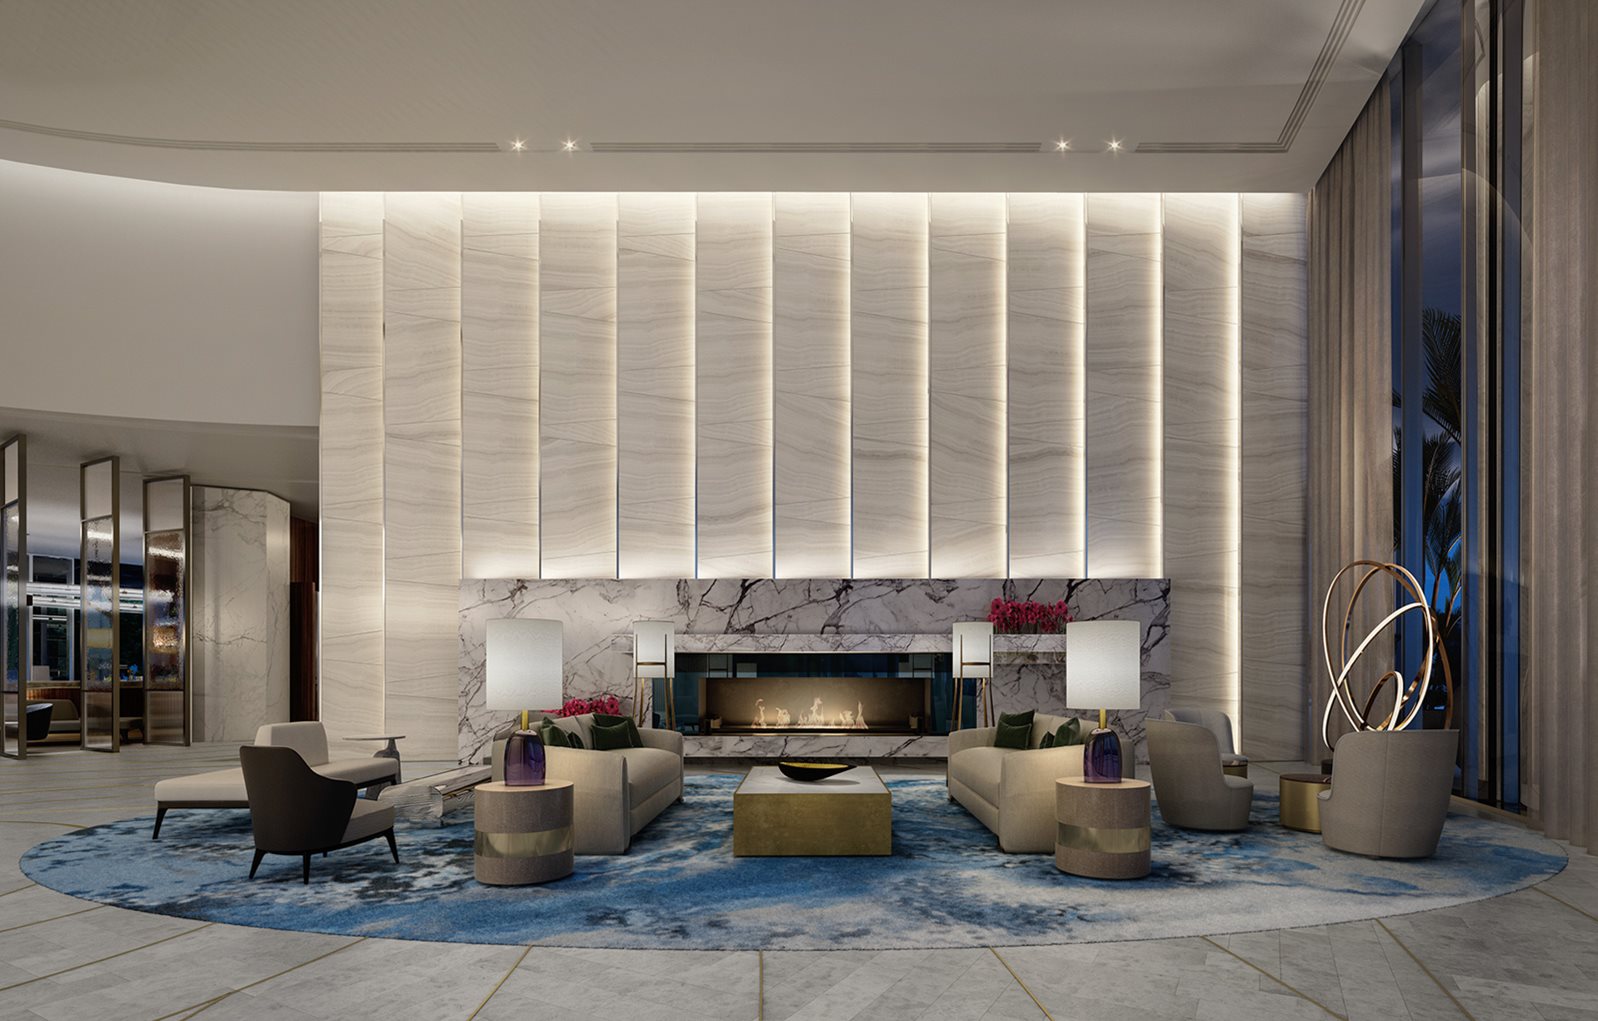 Crown Sydney Towers Lobby Fireplace